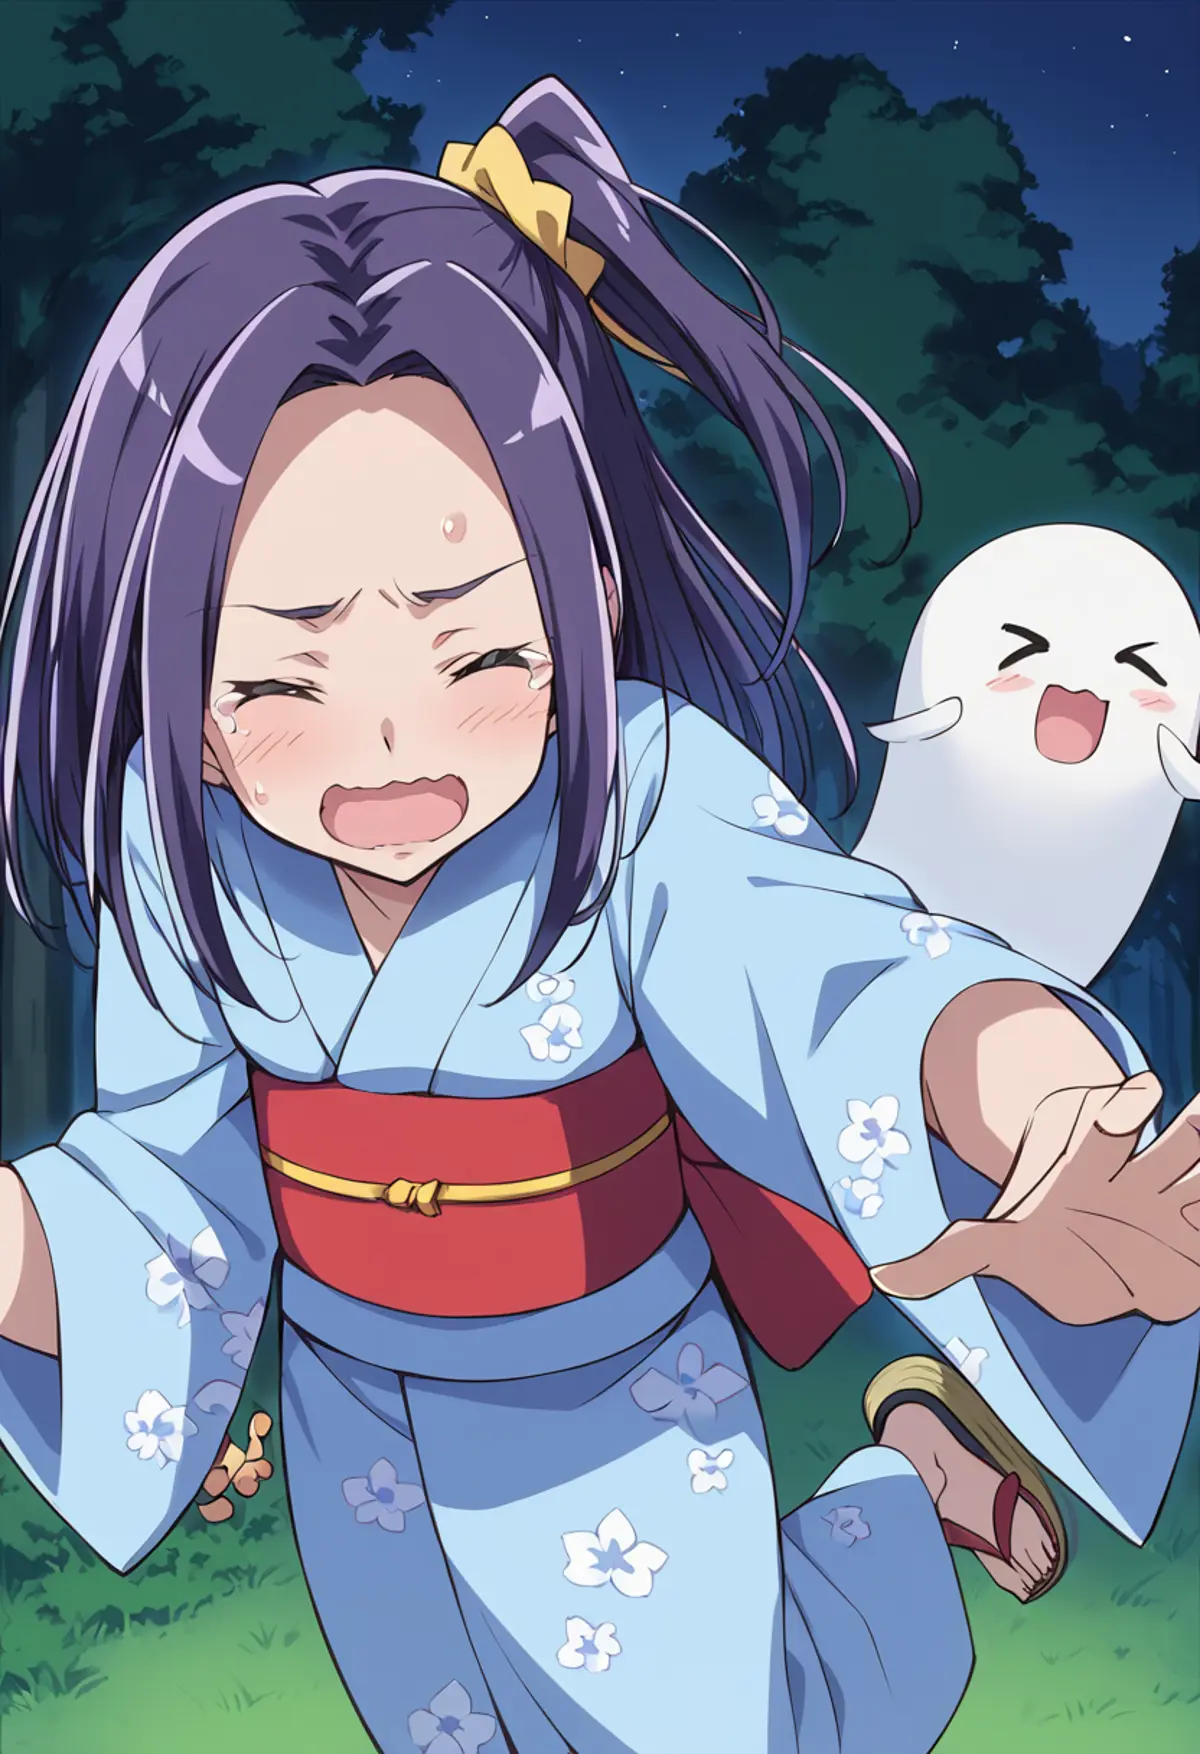 A girl with purple hair and blue floral kimono, screaming with tears welling up in her eyes. She is fleeing a small, white ghost with black eyes and an open mouth that appears to be playfully chasing or surprising the character. The setting is outdoors at night under a star-filled sky with dense foliage in the background. 